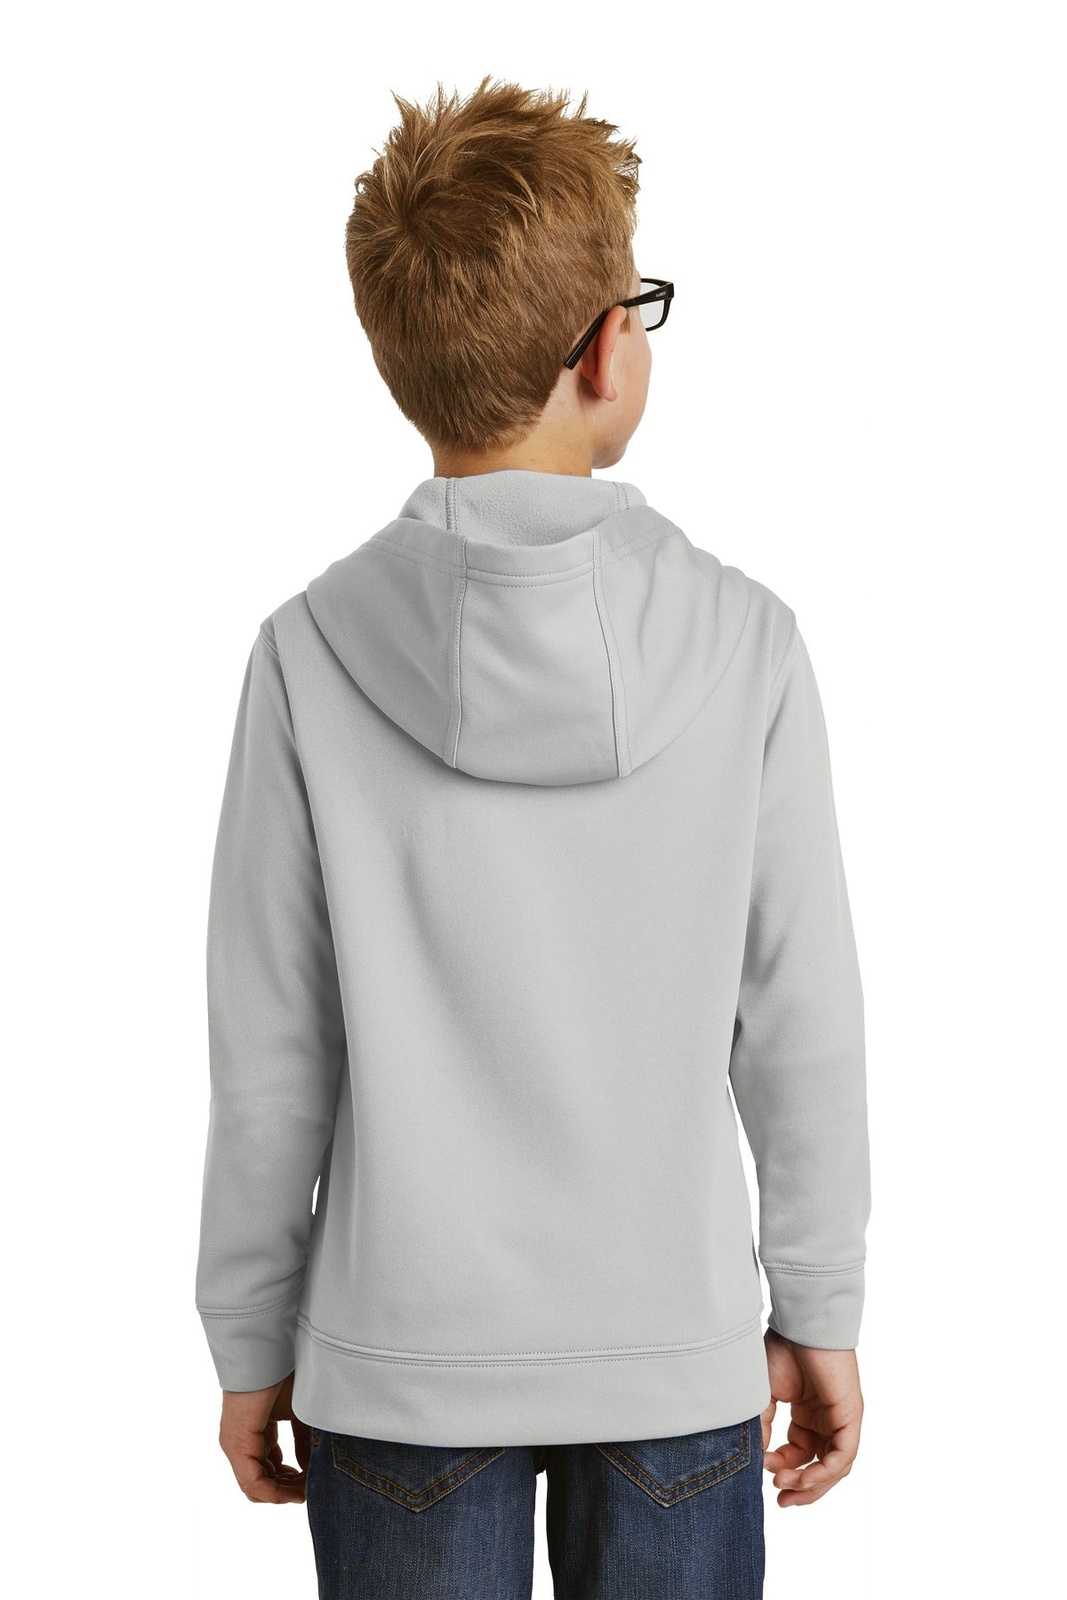 Port & Company PC590YH Youth Performance Fleece Pullover Hooded Sweatshirt - Silver - HIT a Double - 1